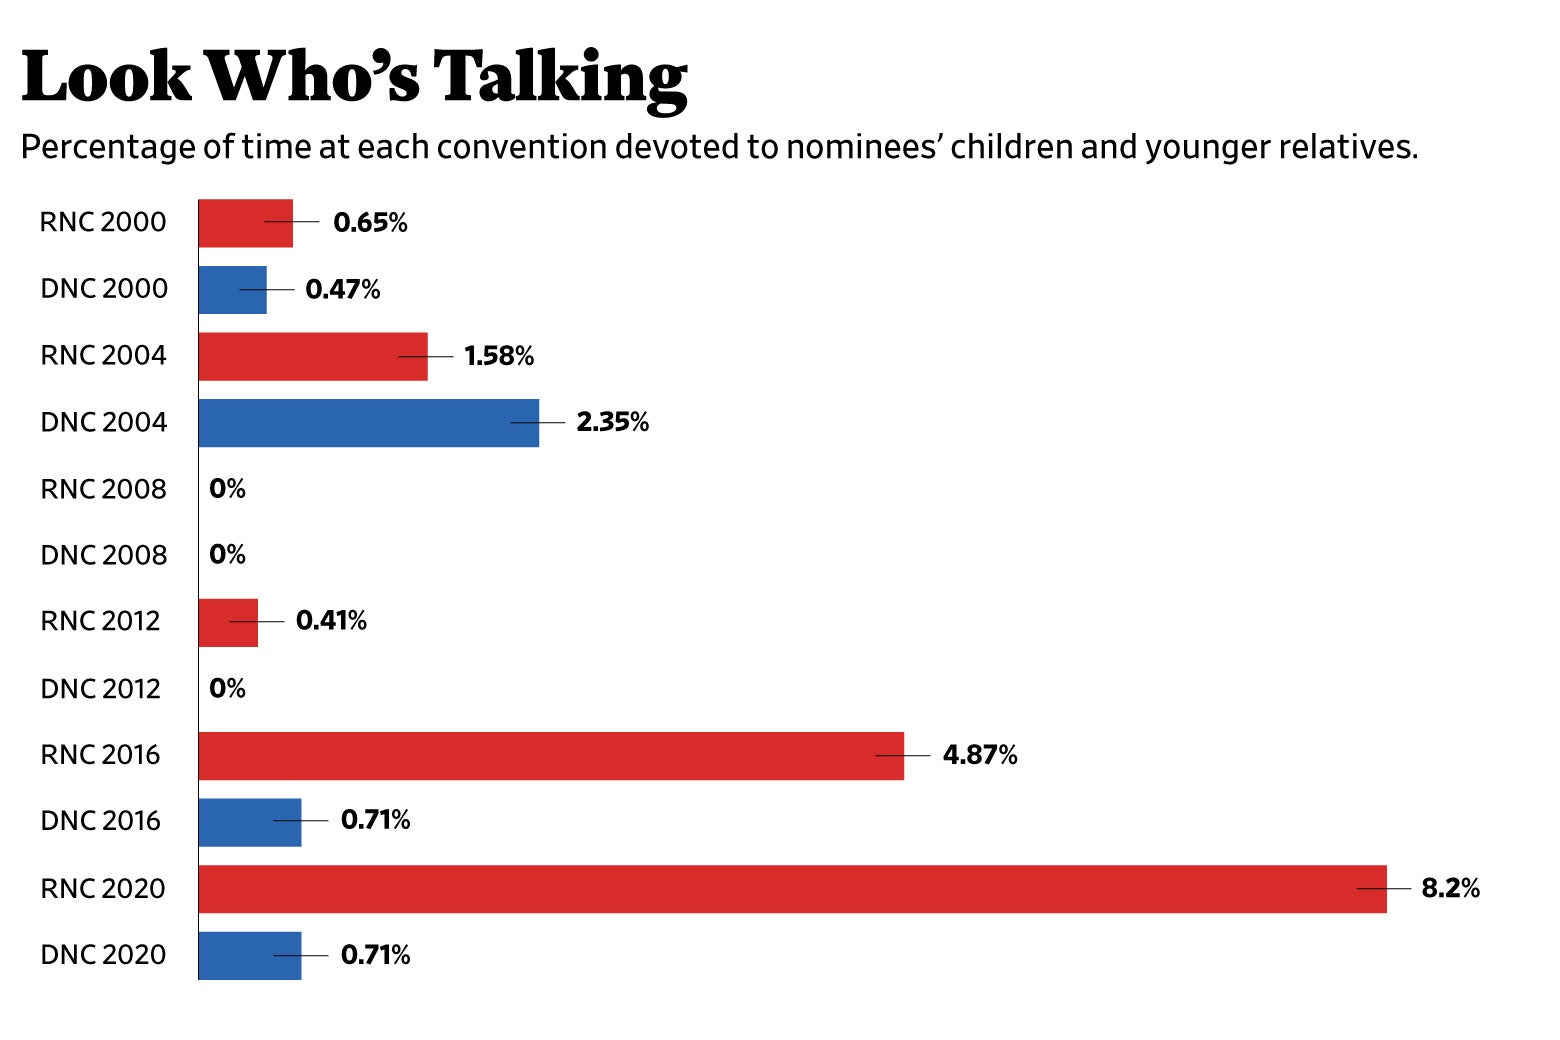 A bar graph displaying the percentage of time at each convention devoted to nominees' children and younger relatives.